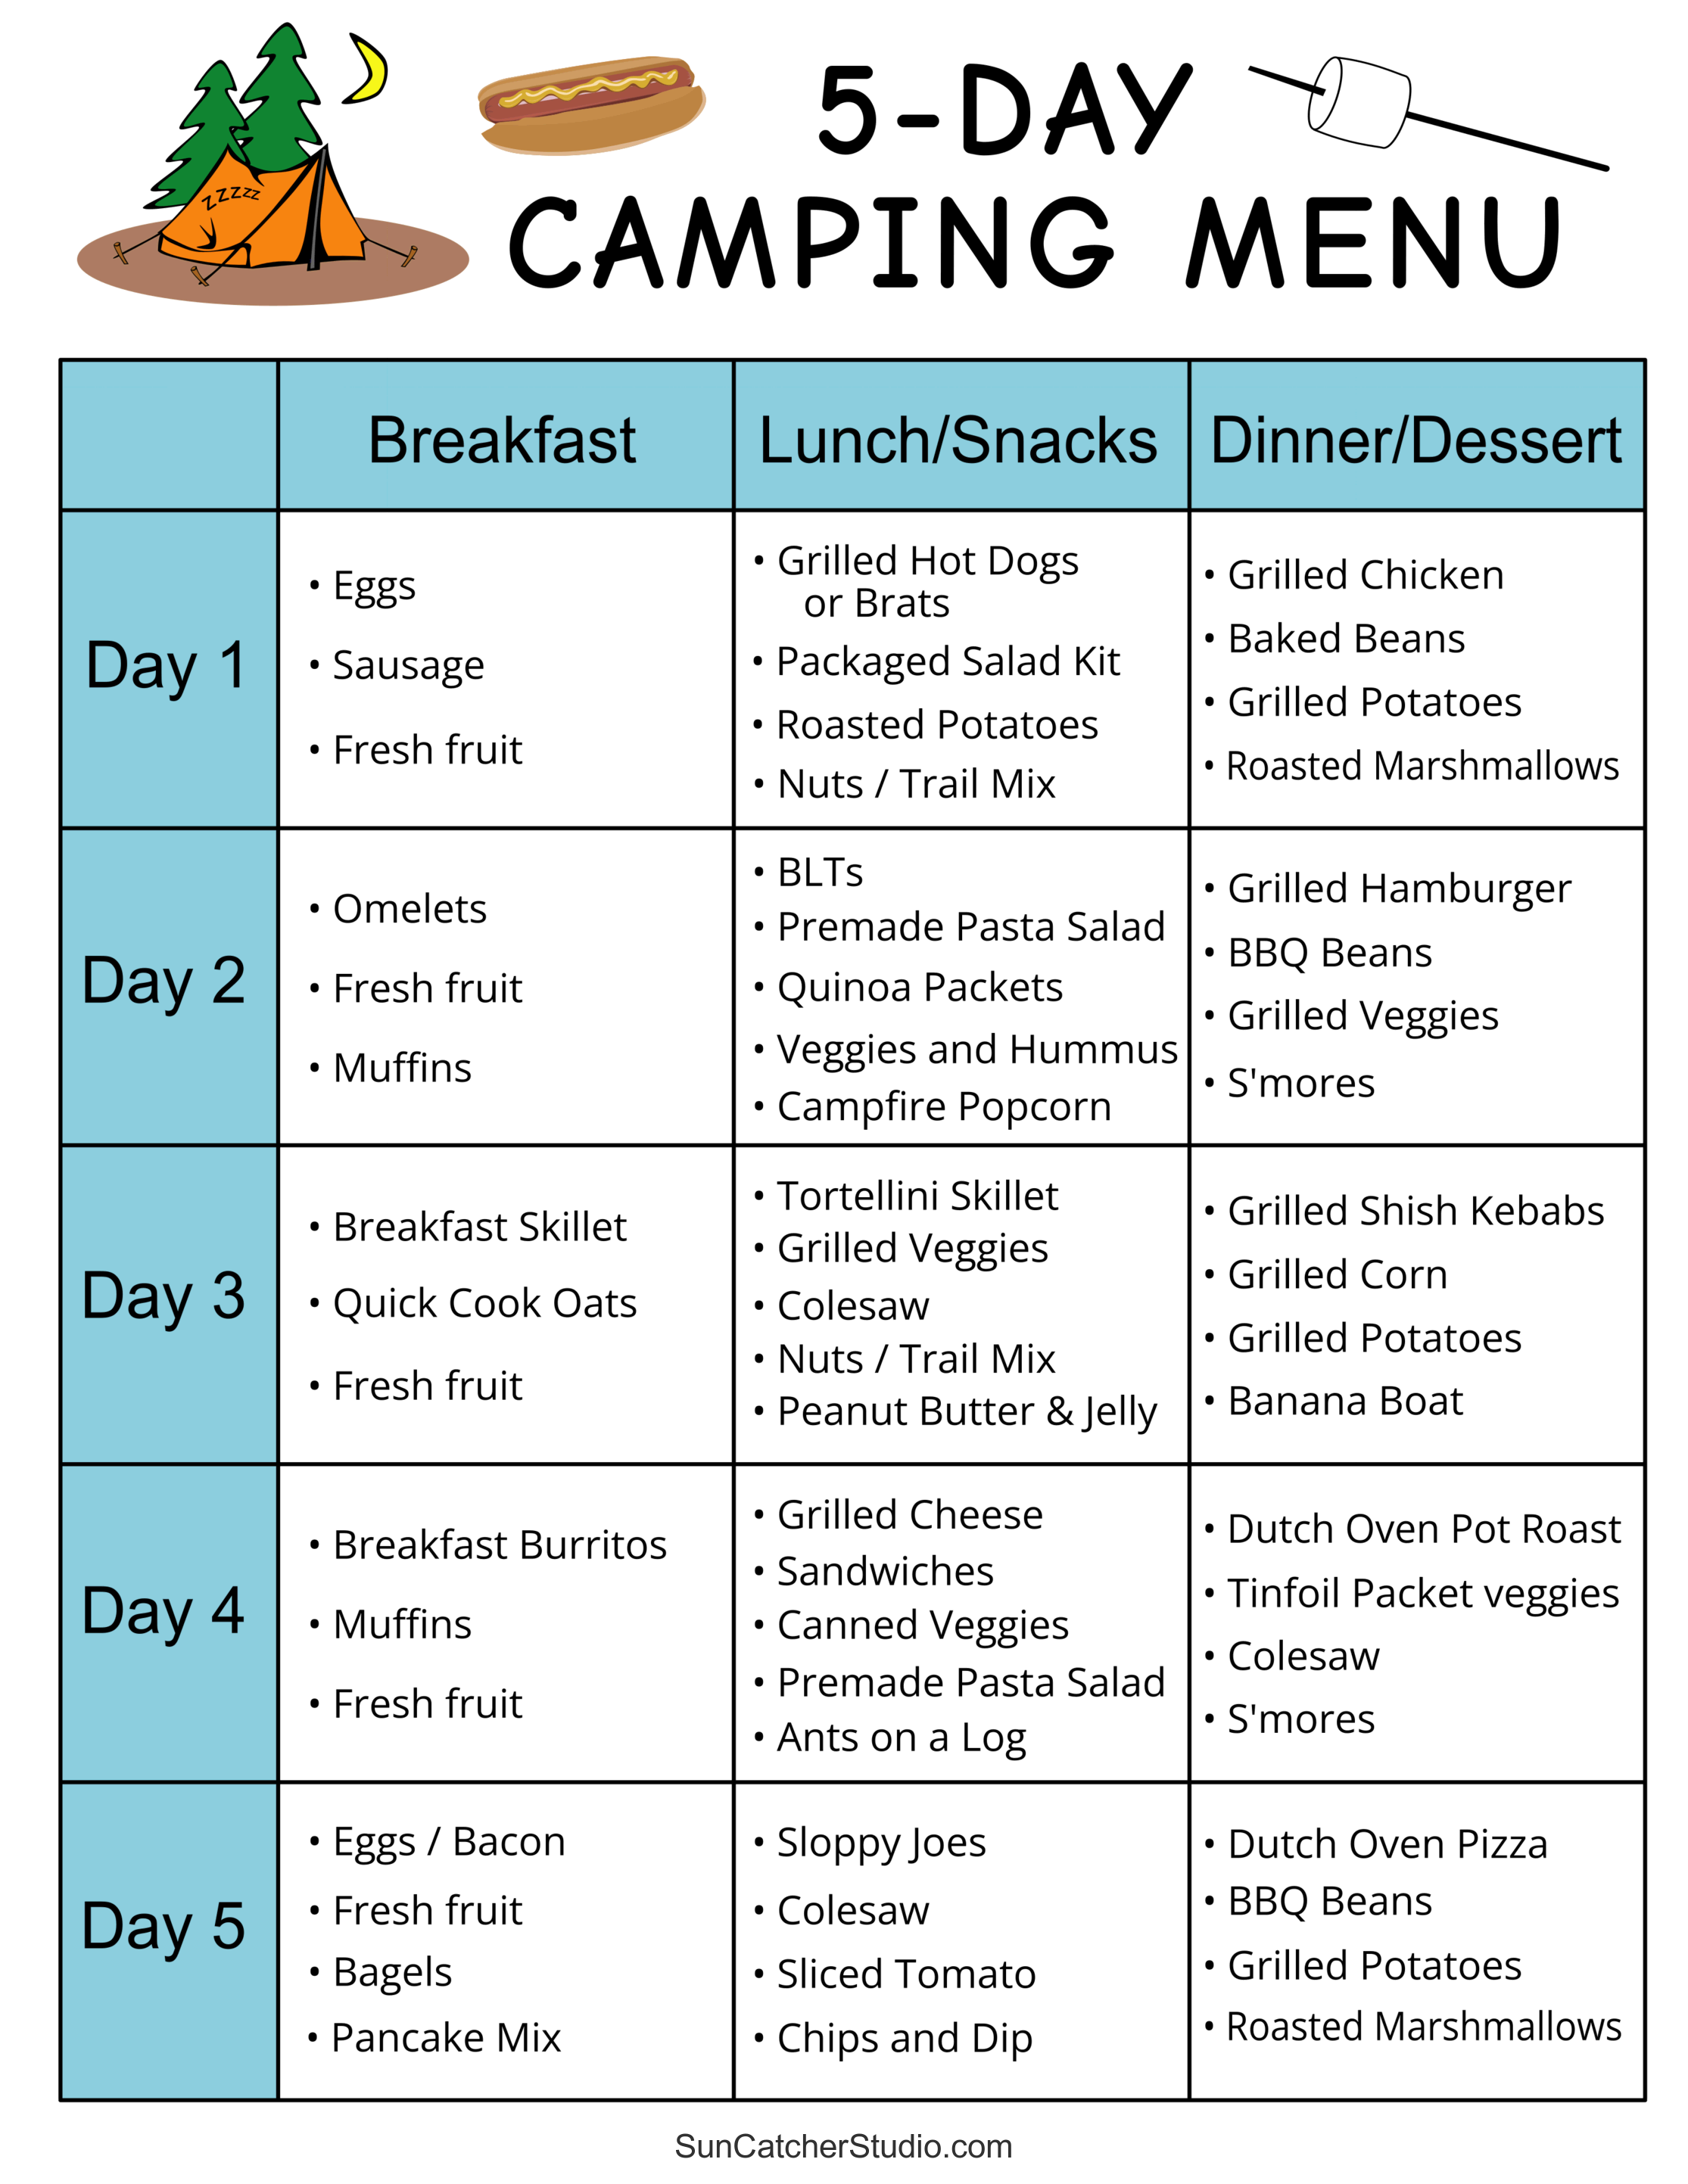 Camping Checklist Printable I Camping Essentials Packing List I